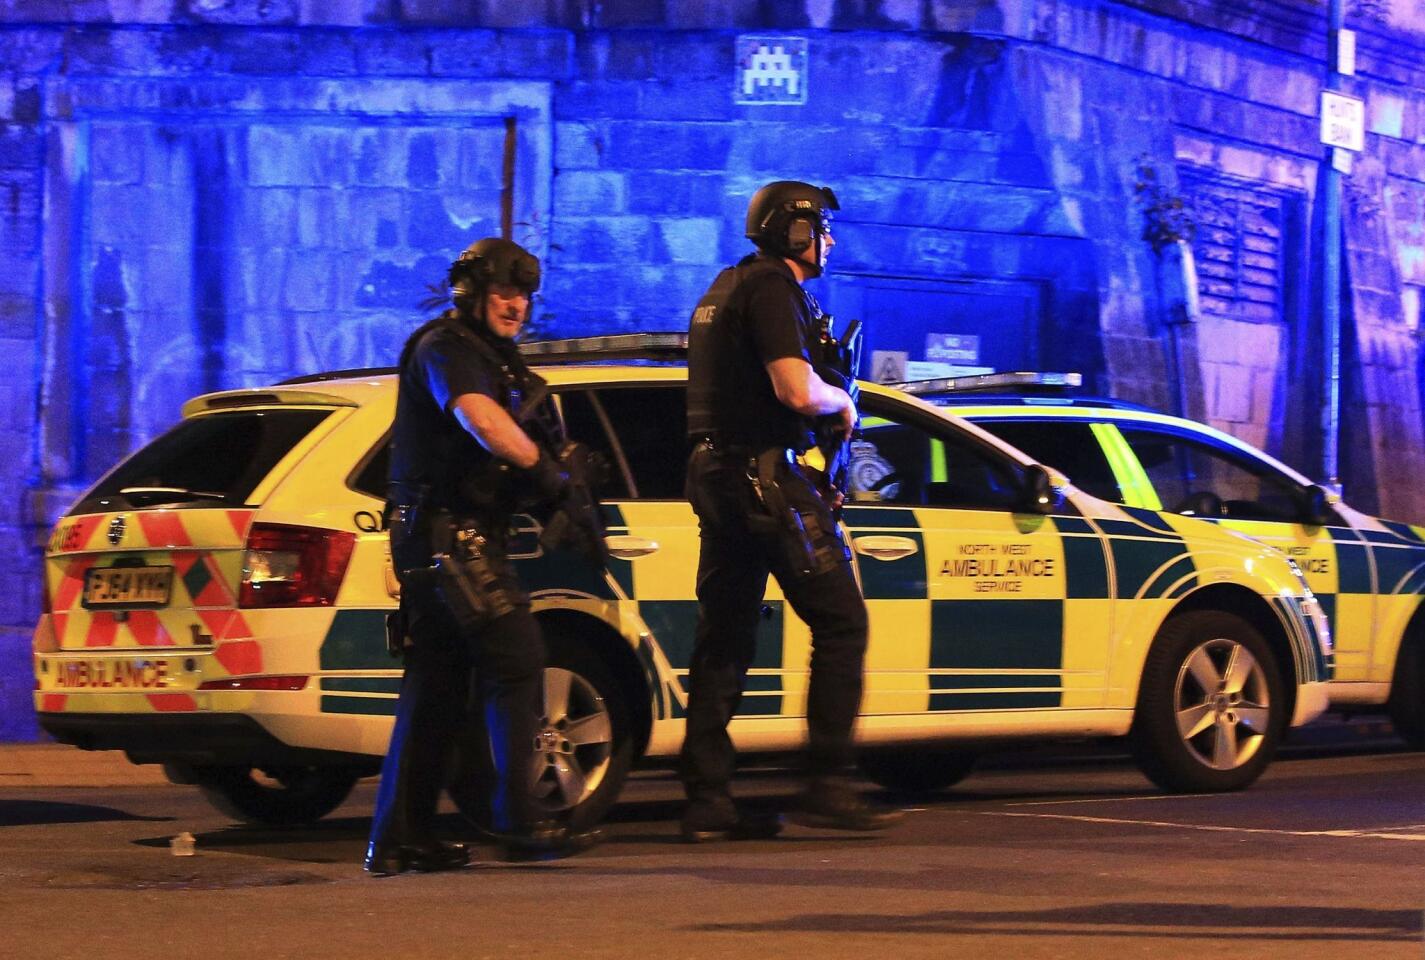 Armed police work at Manchester Arena after reports of an explosion at the venue during an Ariana Grande gig in Manchester, England Monday, May 22, 2017. Several people have died following reports of an explosion Monday night at an Ariana Grande concert in northern England, police said. A representative said the singer was not injured.